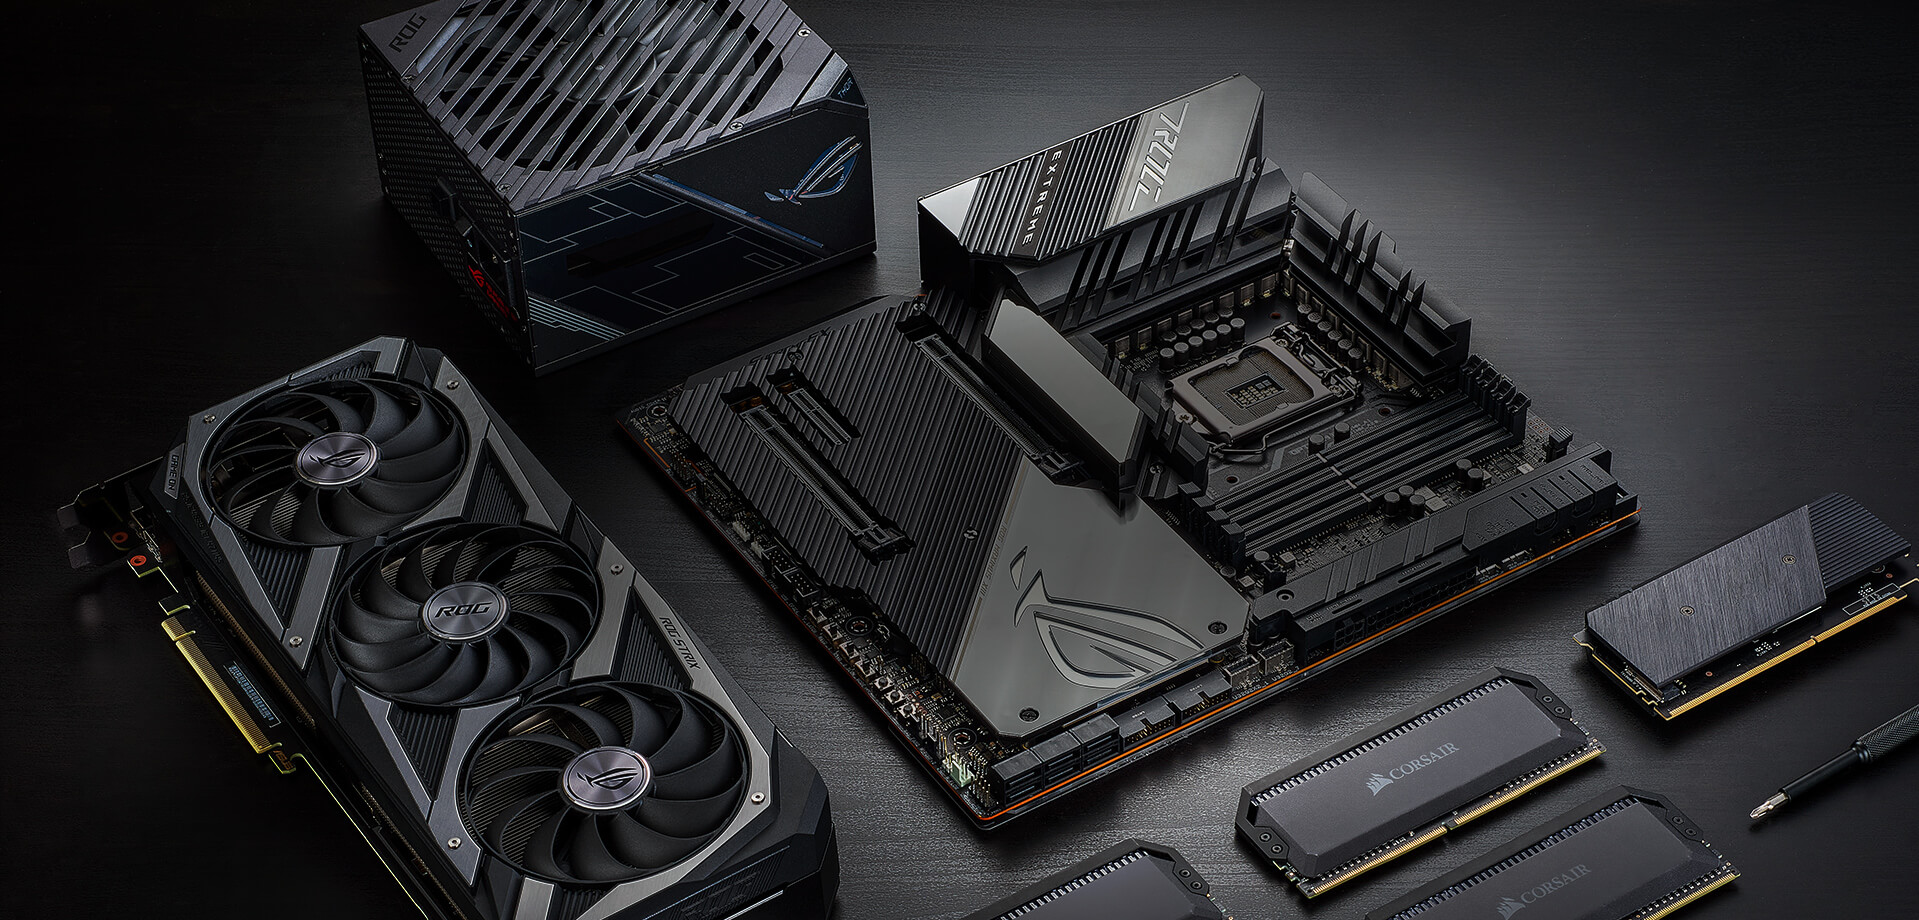 ROG Maximus XIII Extreme with other ROG products